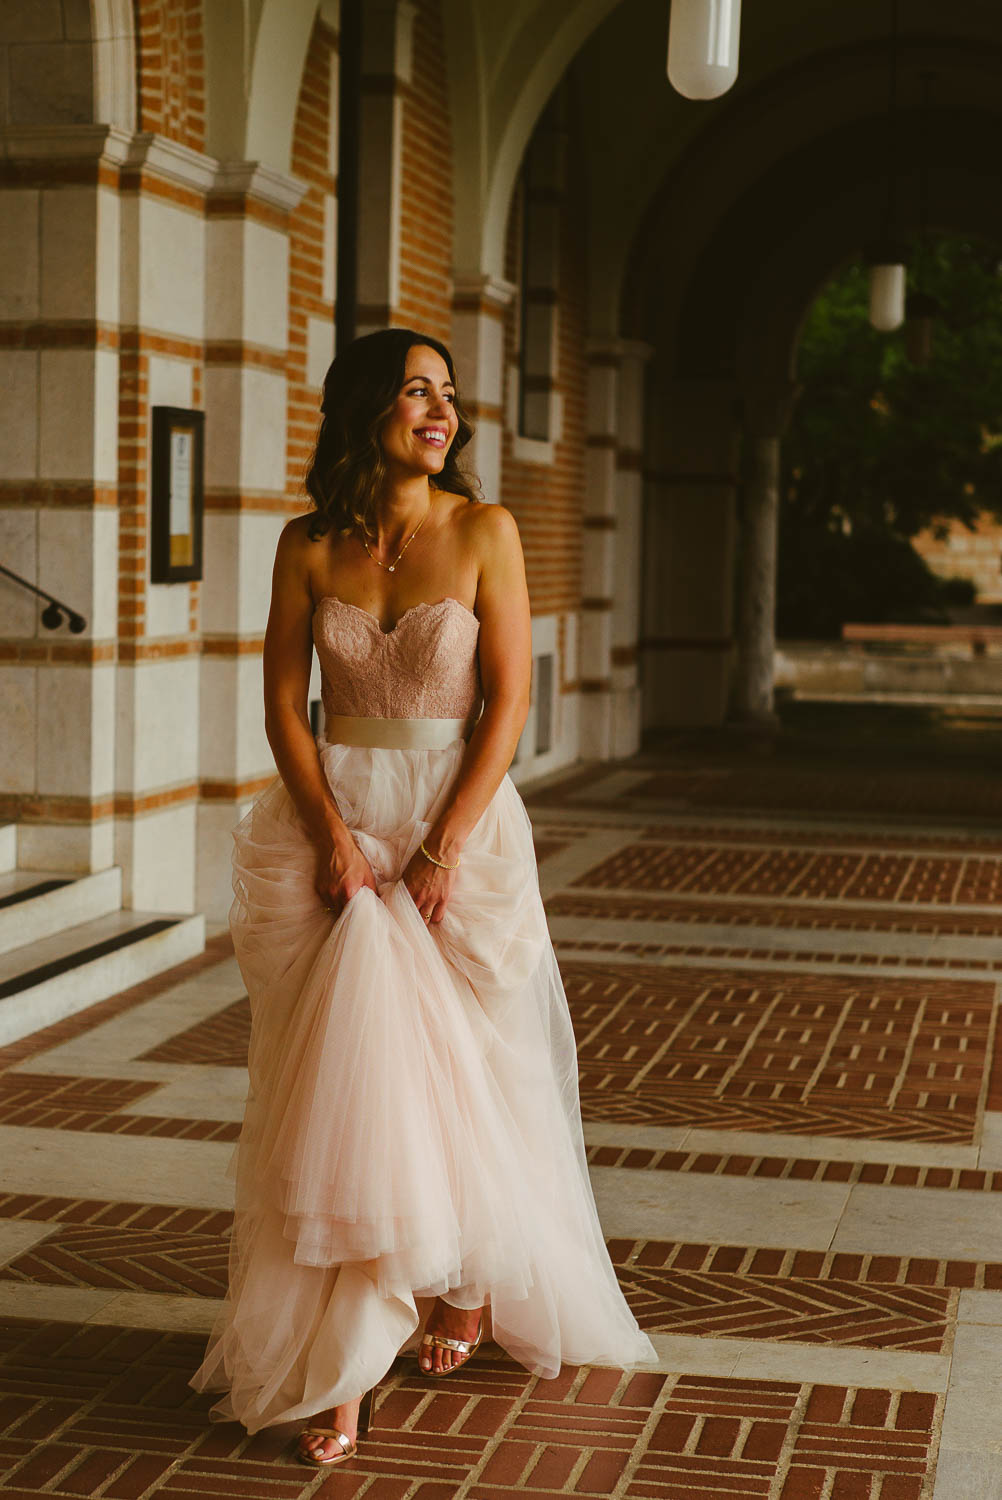 Rice University Bridal Portrait in heavy showers and high humidity -Leica photographer-Philip Thomas Photography